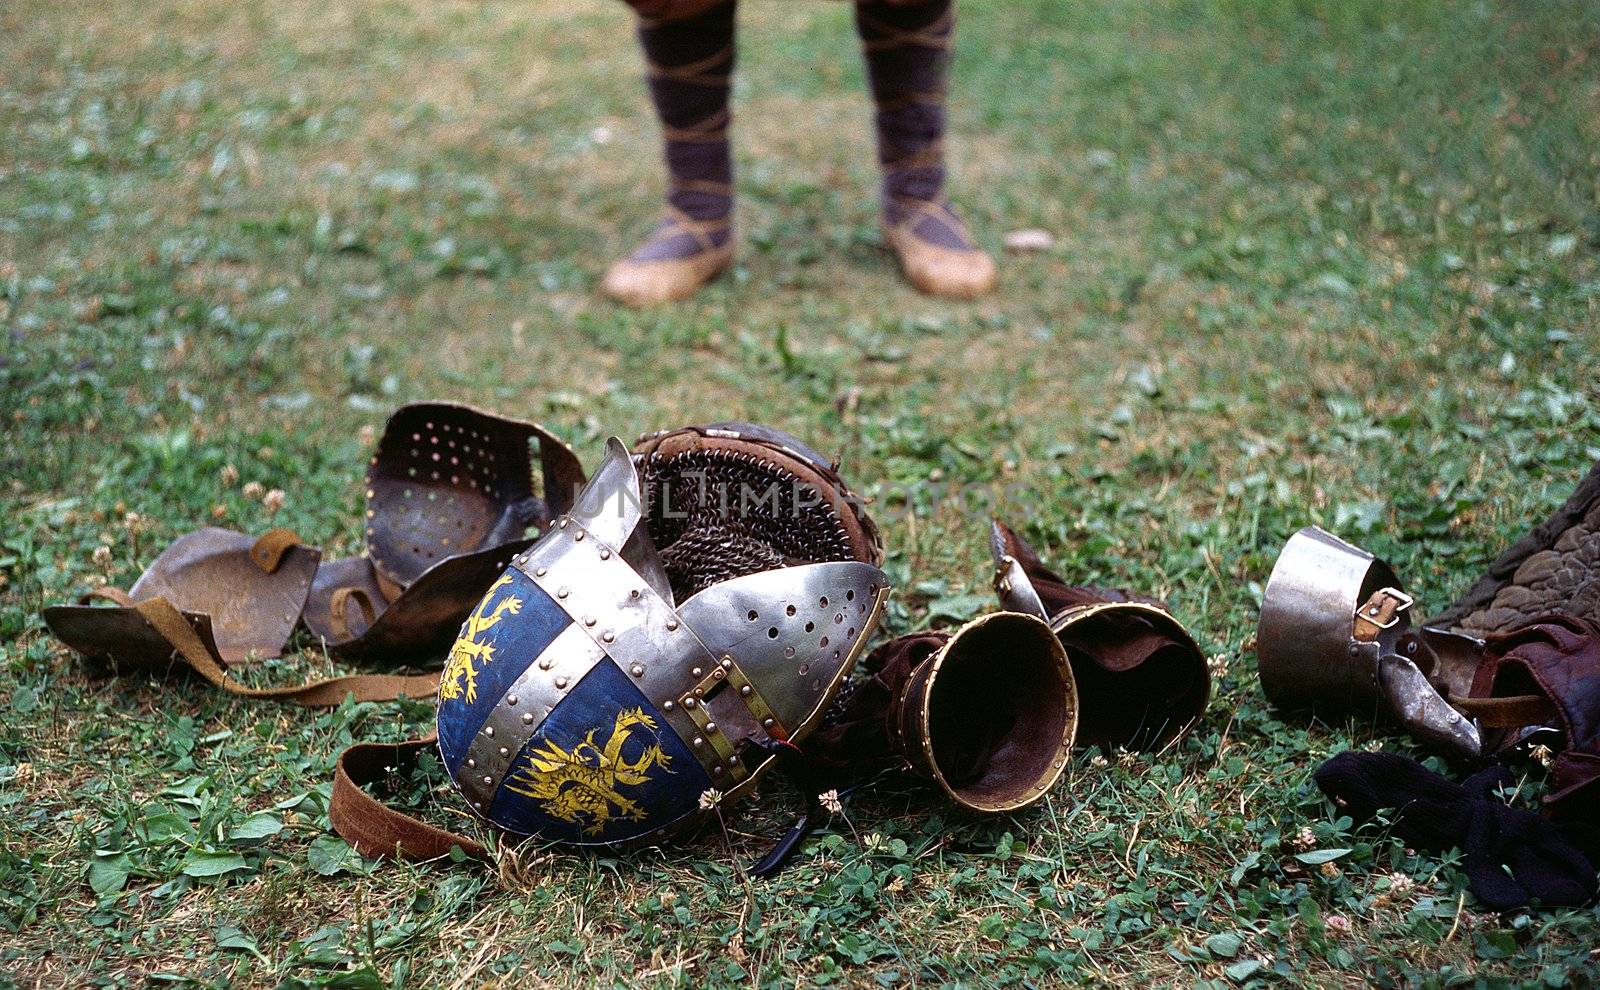 legs in a bast shoes, helmet and armour on the groung after the tournament